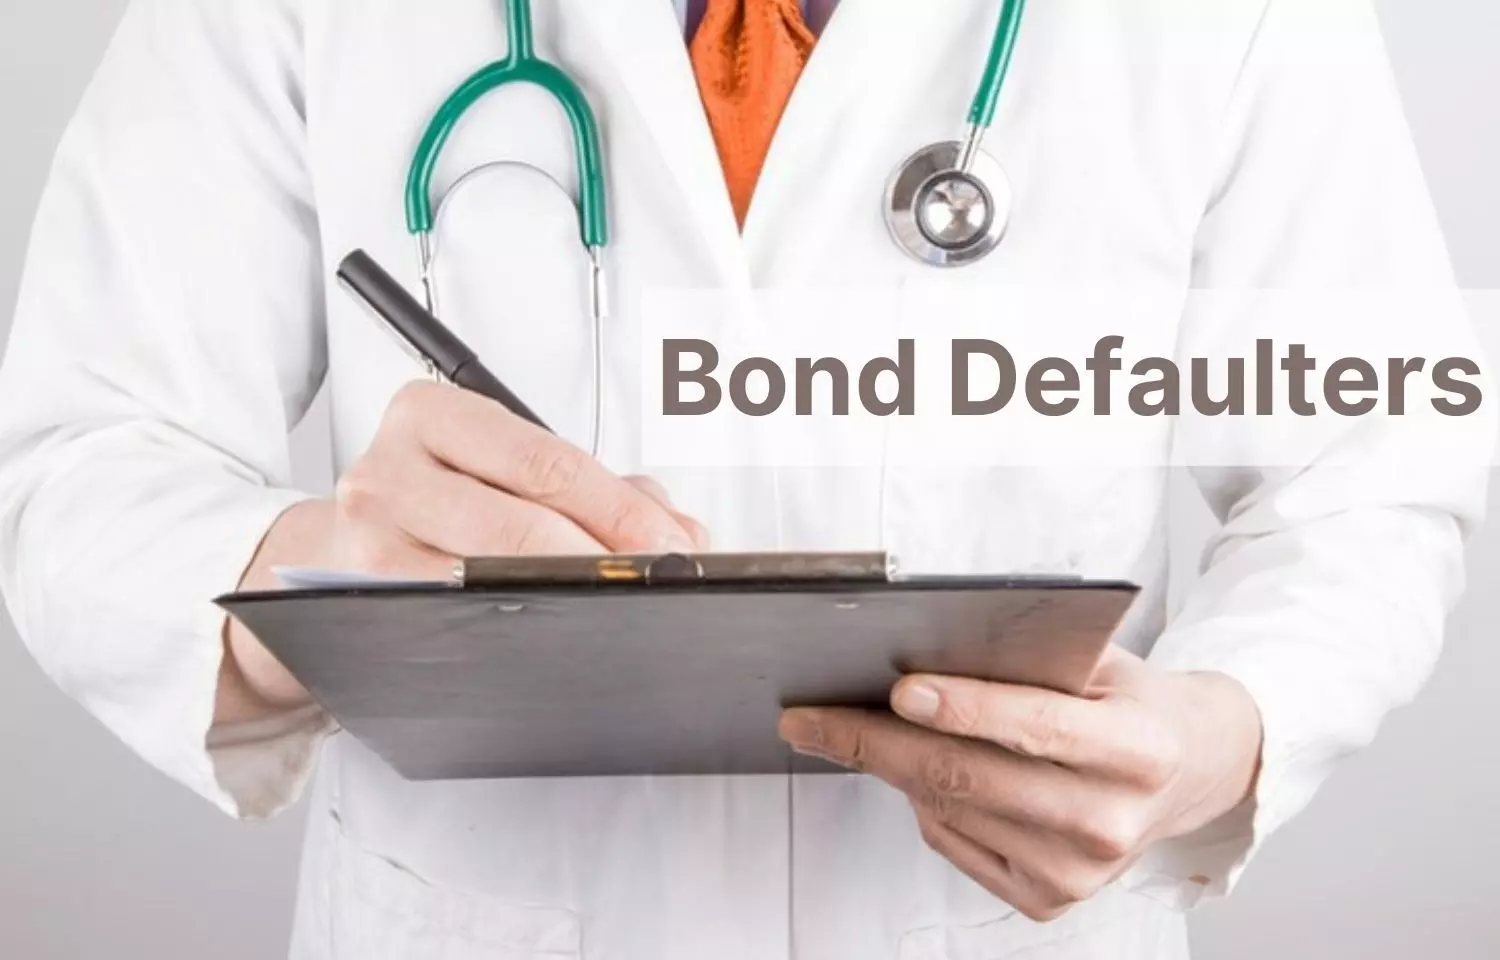 Join Duty or Submit penalty within 15 days: Uttarakhand Govts ultimatum for bonded doctors